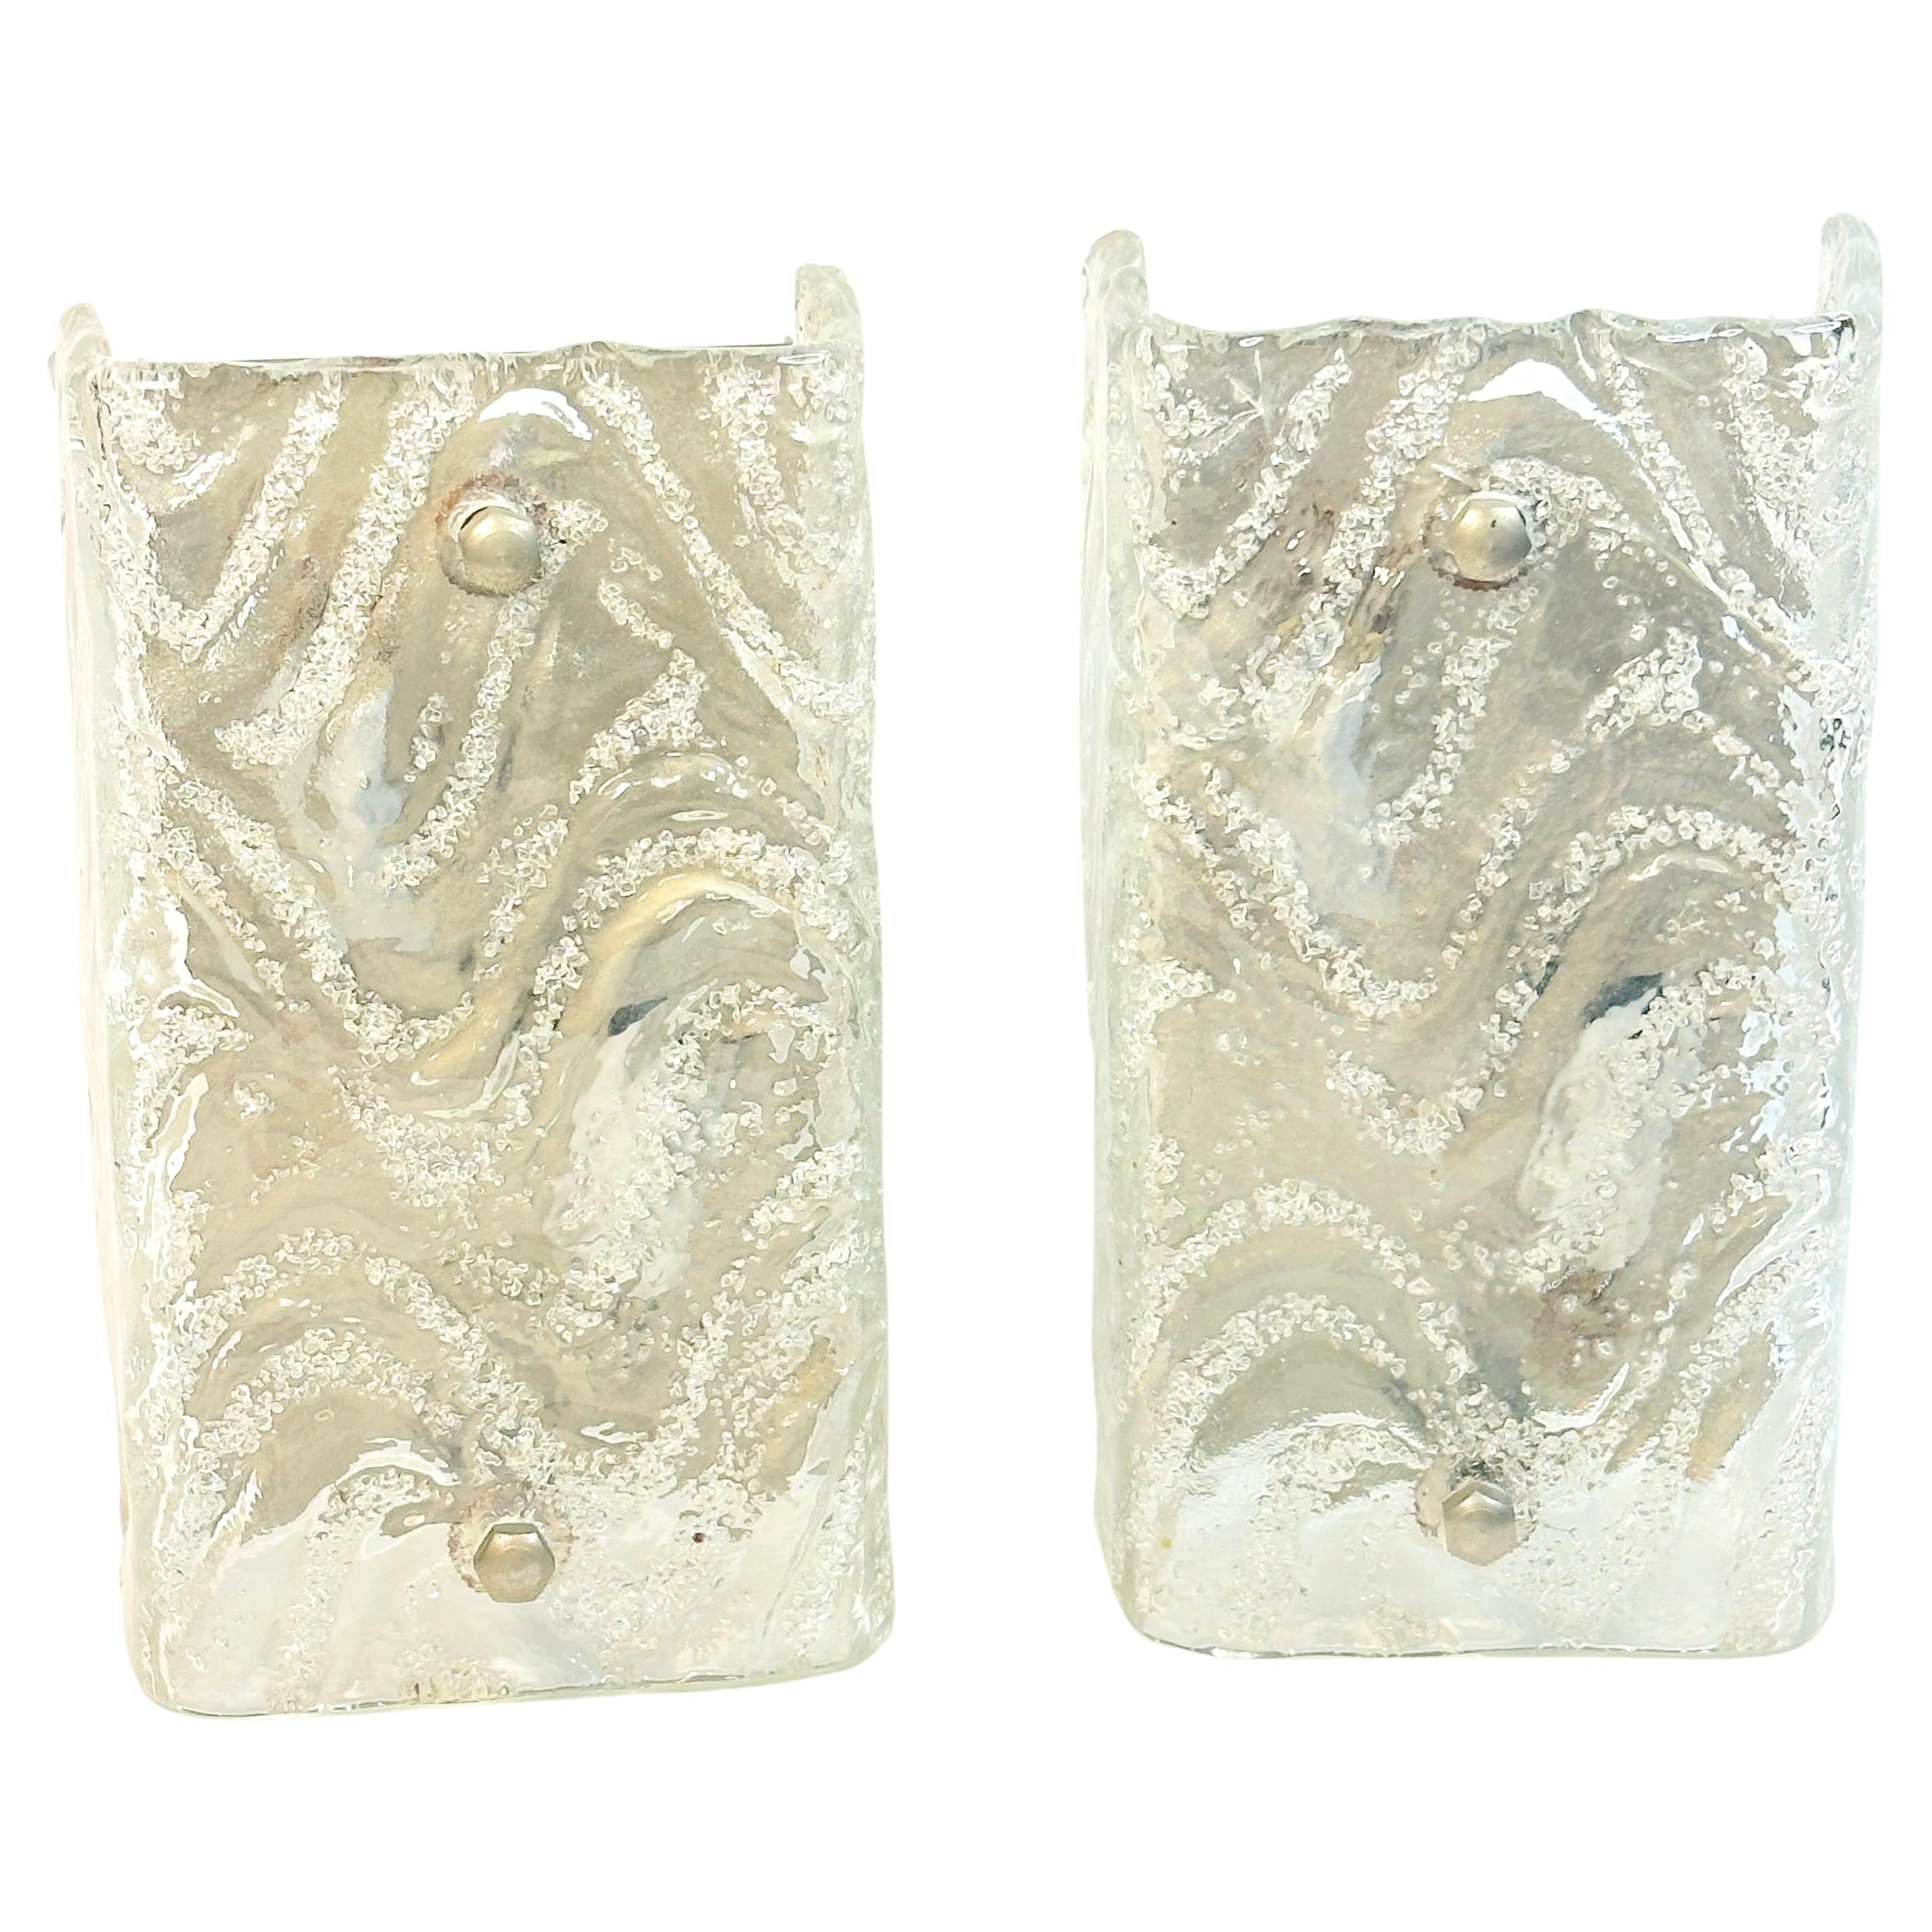 Stunning Pair of Murano Glass Ice Block Sconces with Swirl or Wave Pattern 1960s For Sale